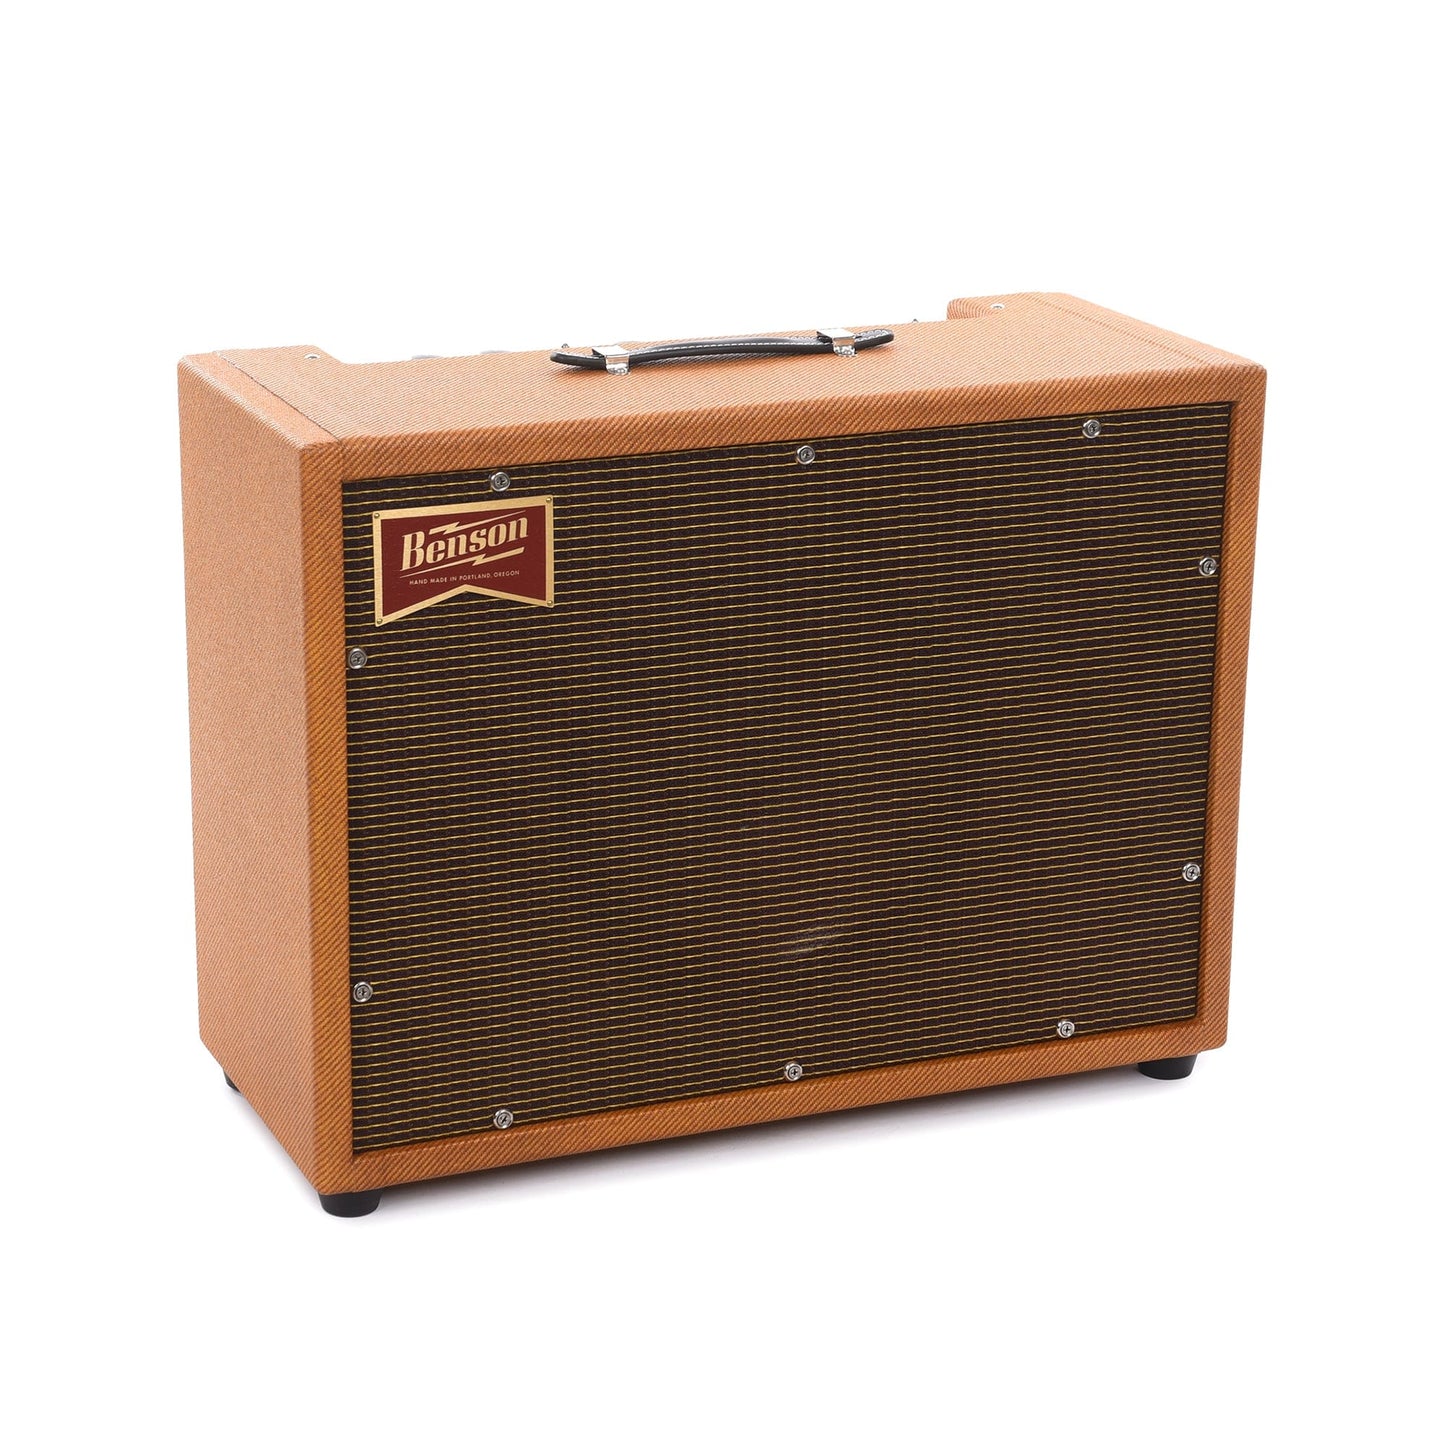 Benson Monarch Reverb 1x12 Combo Tweed w/Oxbood Grill Amps / Guitar Combos